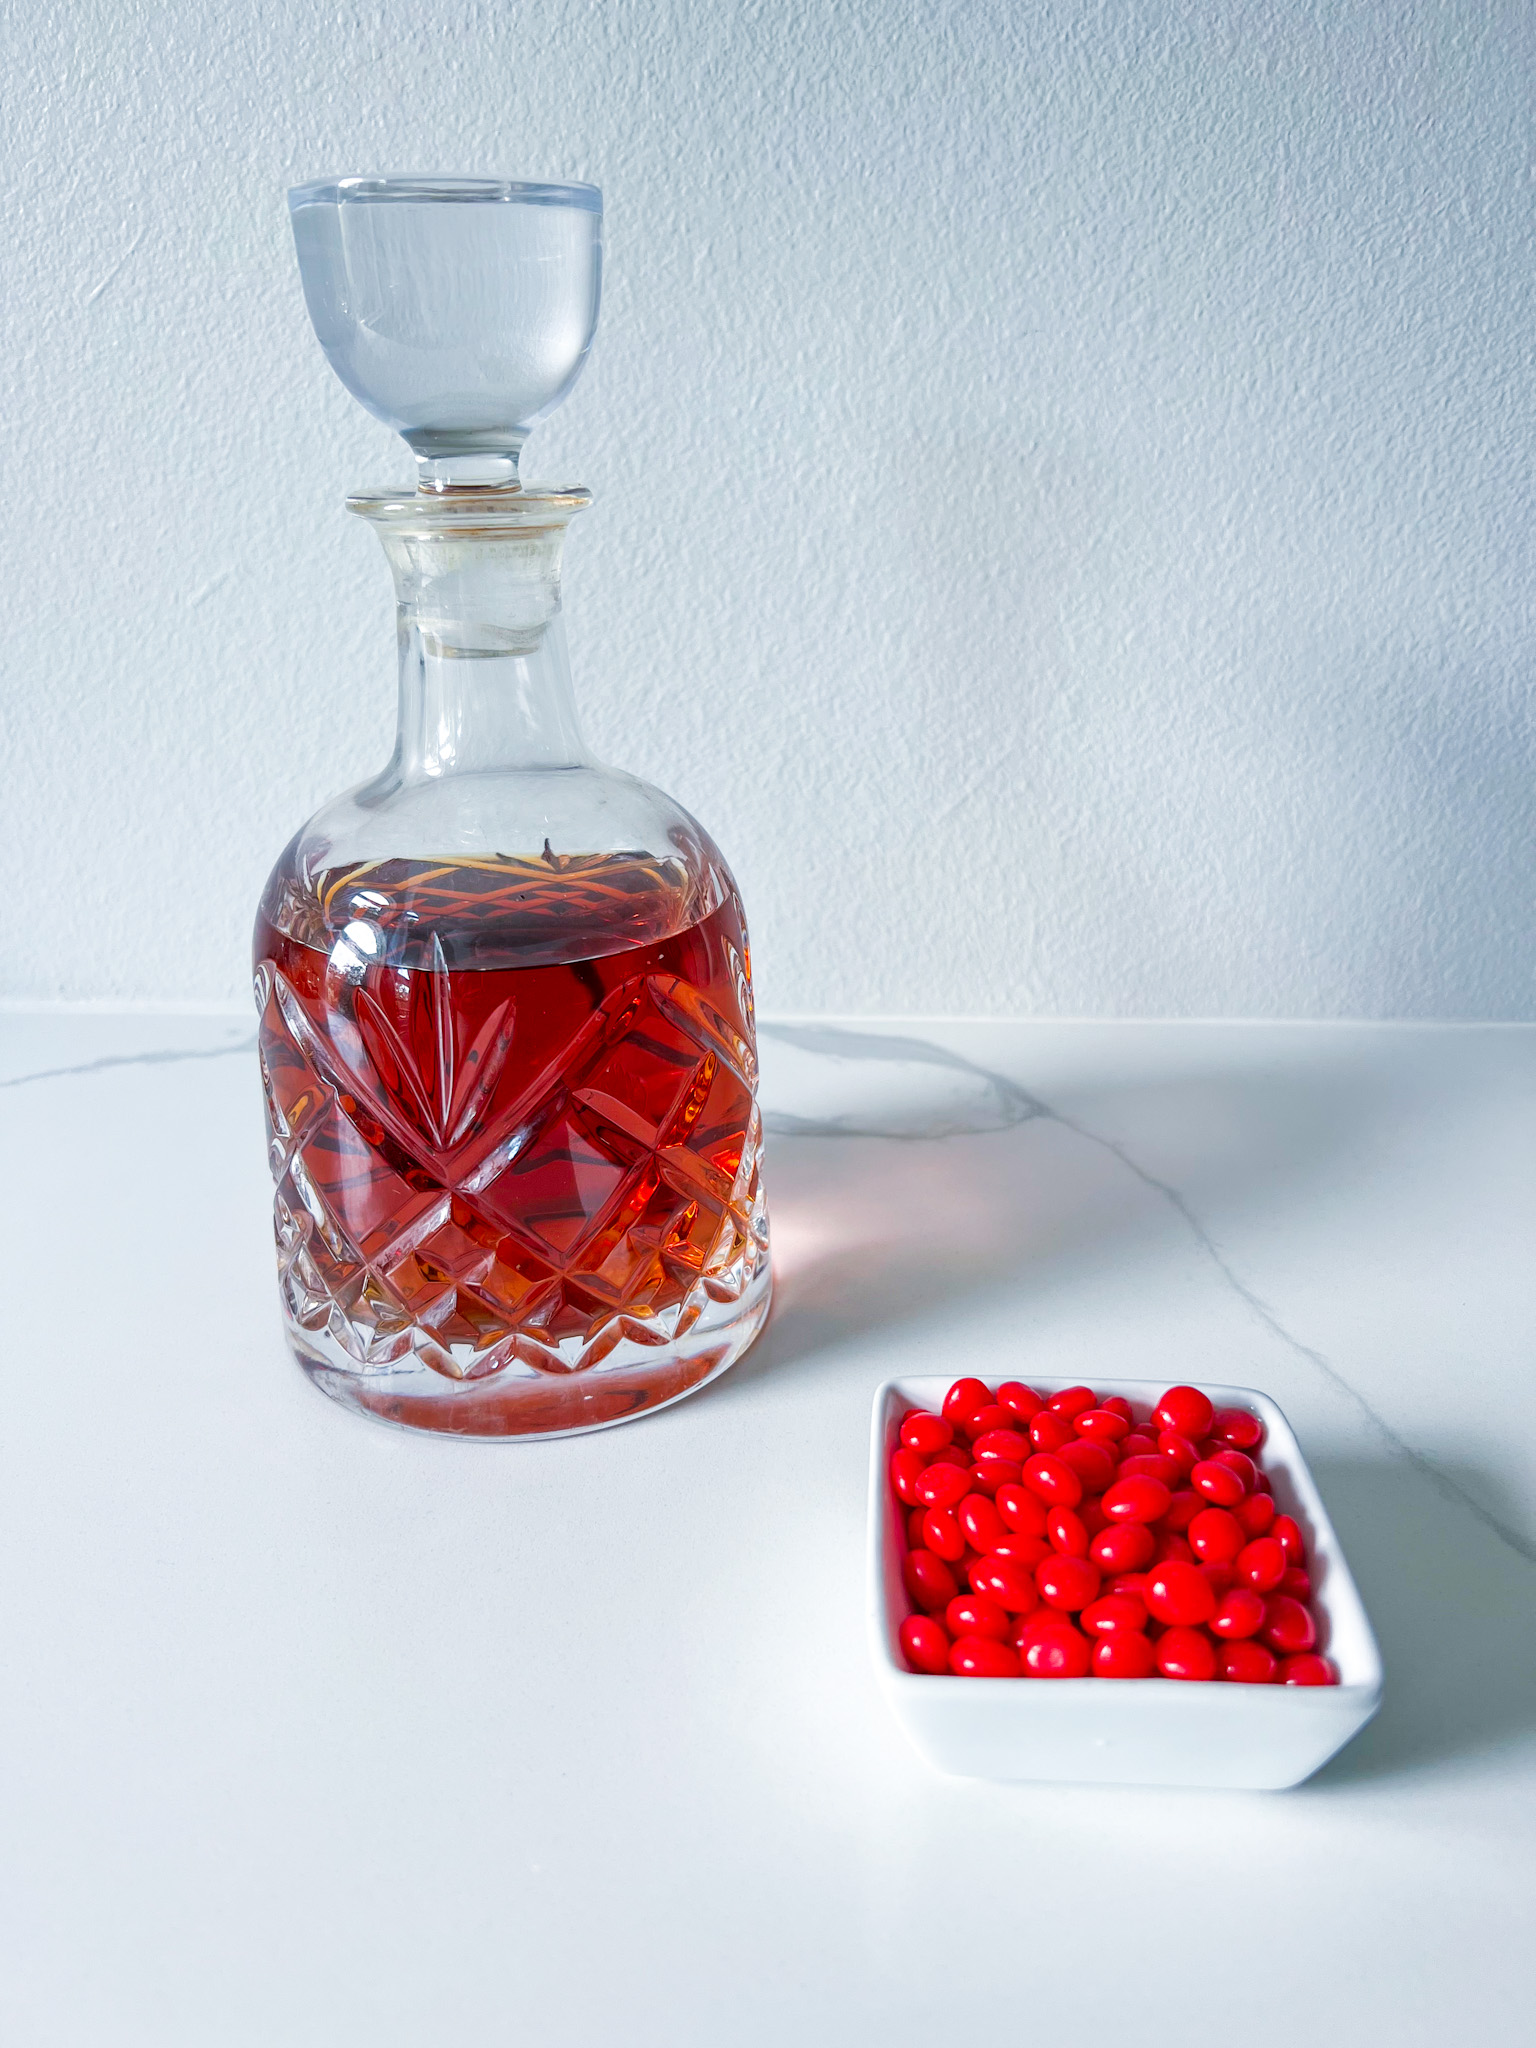 Bourbon in a decanter with a lid and a bowl of red hot candies